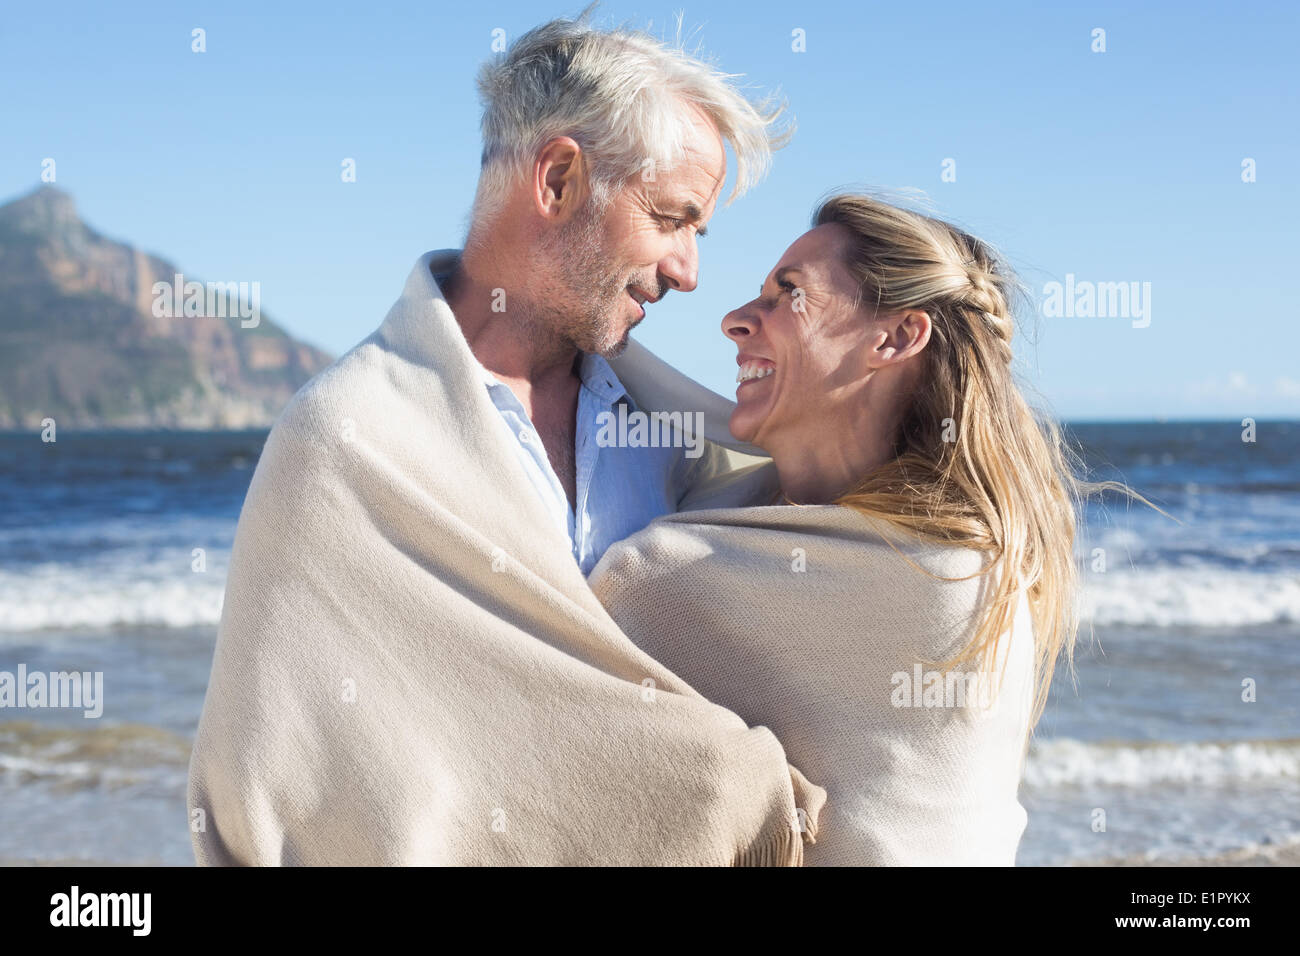 Smiling couple wrapped up in blanket on the beach Stock Photo